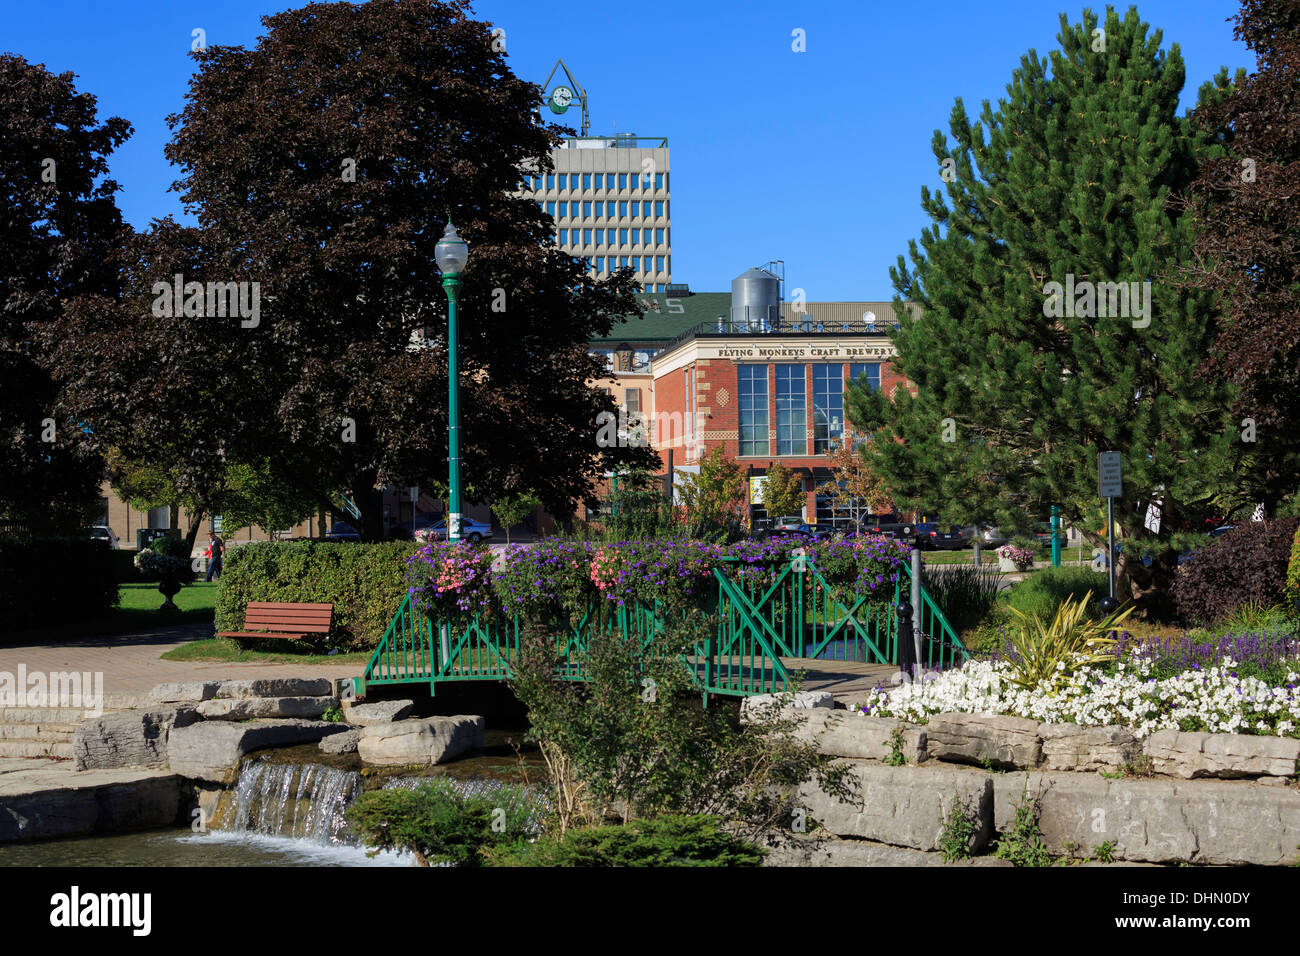 The Flying Monkeys Craft Brewery is seen from Heritage Park in downtown Barrie, Ontario. Stock Photo